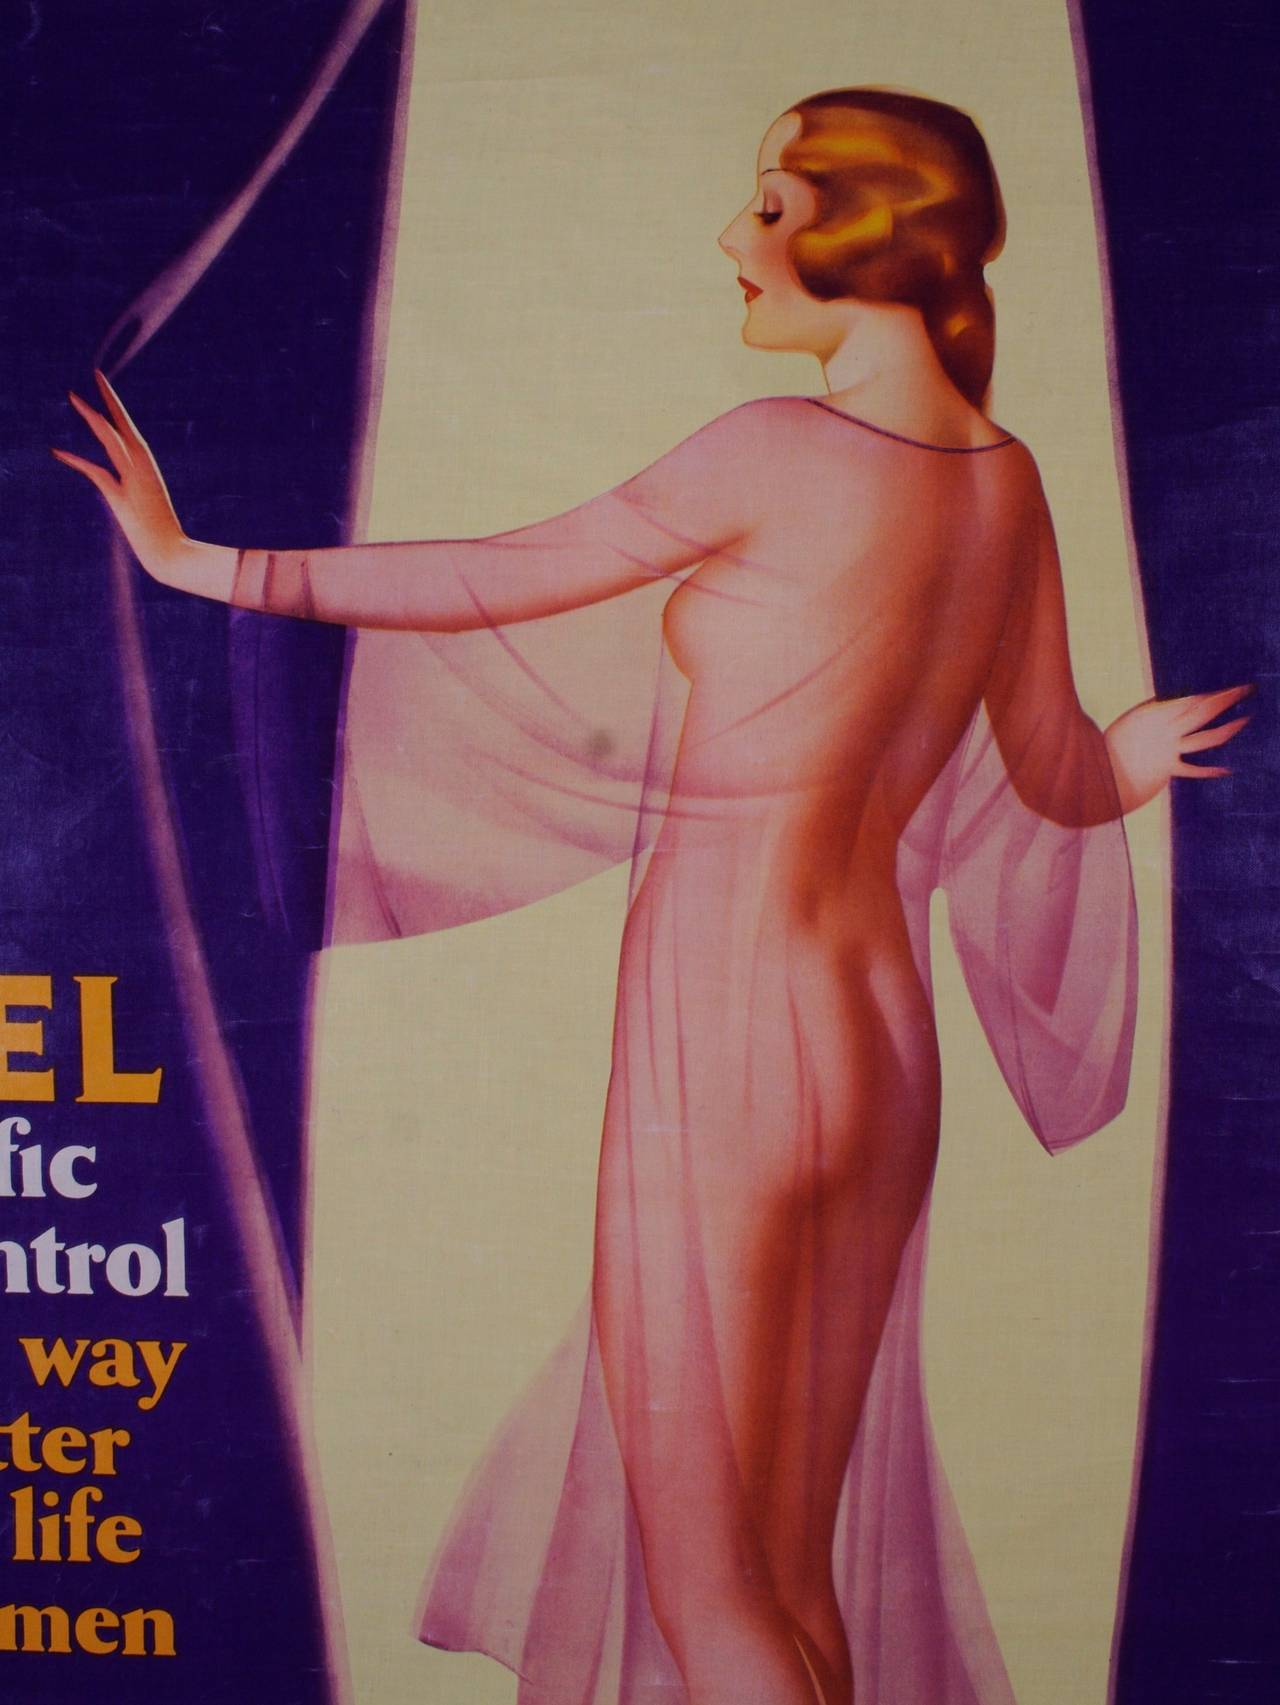 A rare American advertisement for "Va-Jel" birth control by George Petty, circa 1940. Petty (1894-1975) created the "Petty Girl," an American pin-up icon who captured the nation's heart. From 1933-1956 her likeness was seen on